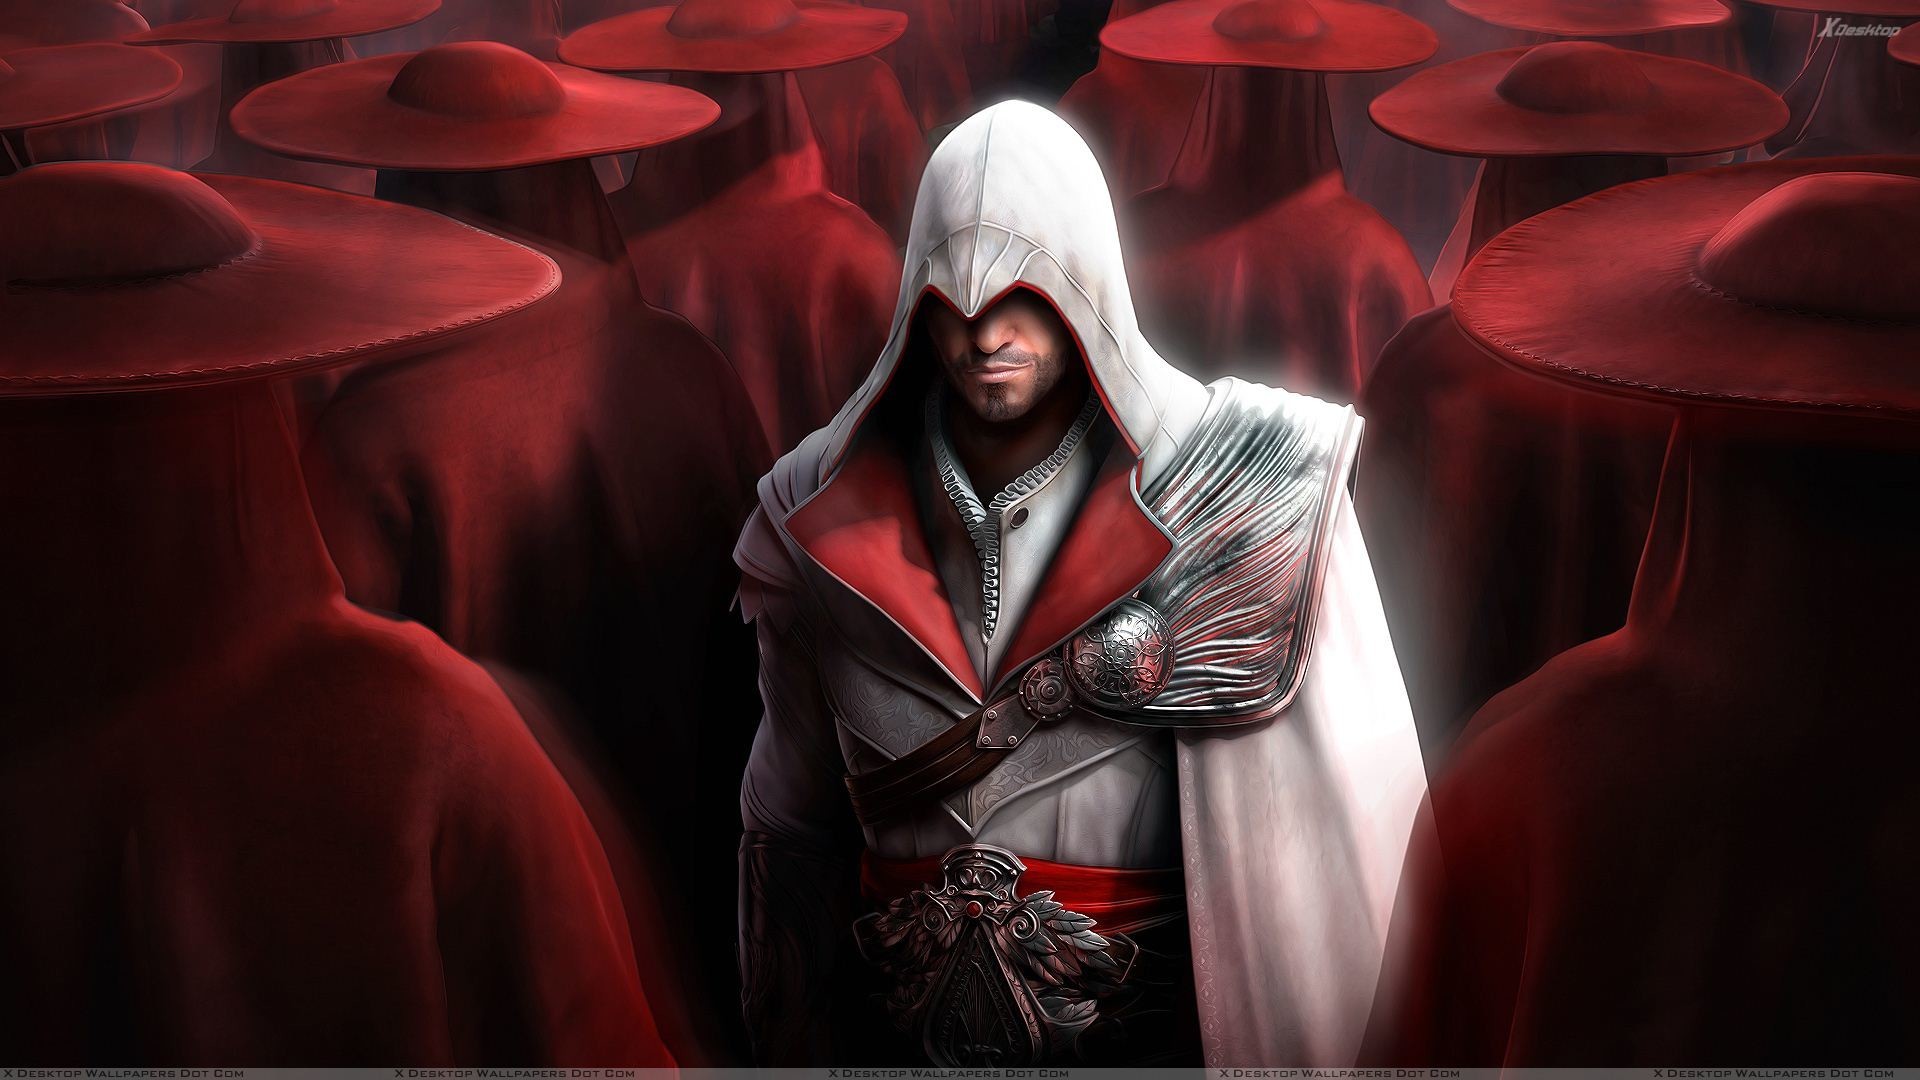 70 Assassins Creed II HD Wallpapers and Backgrounds